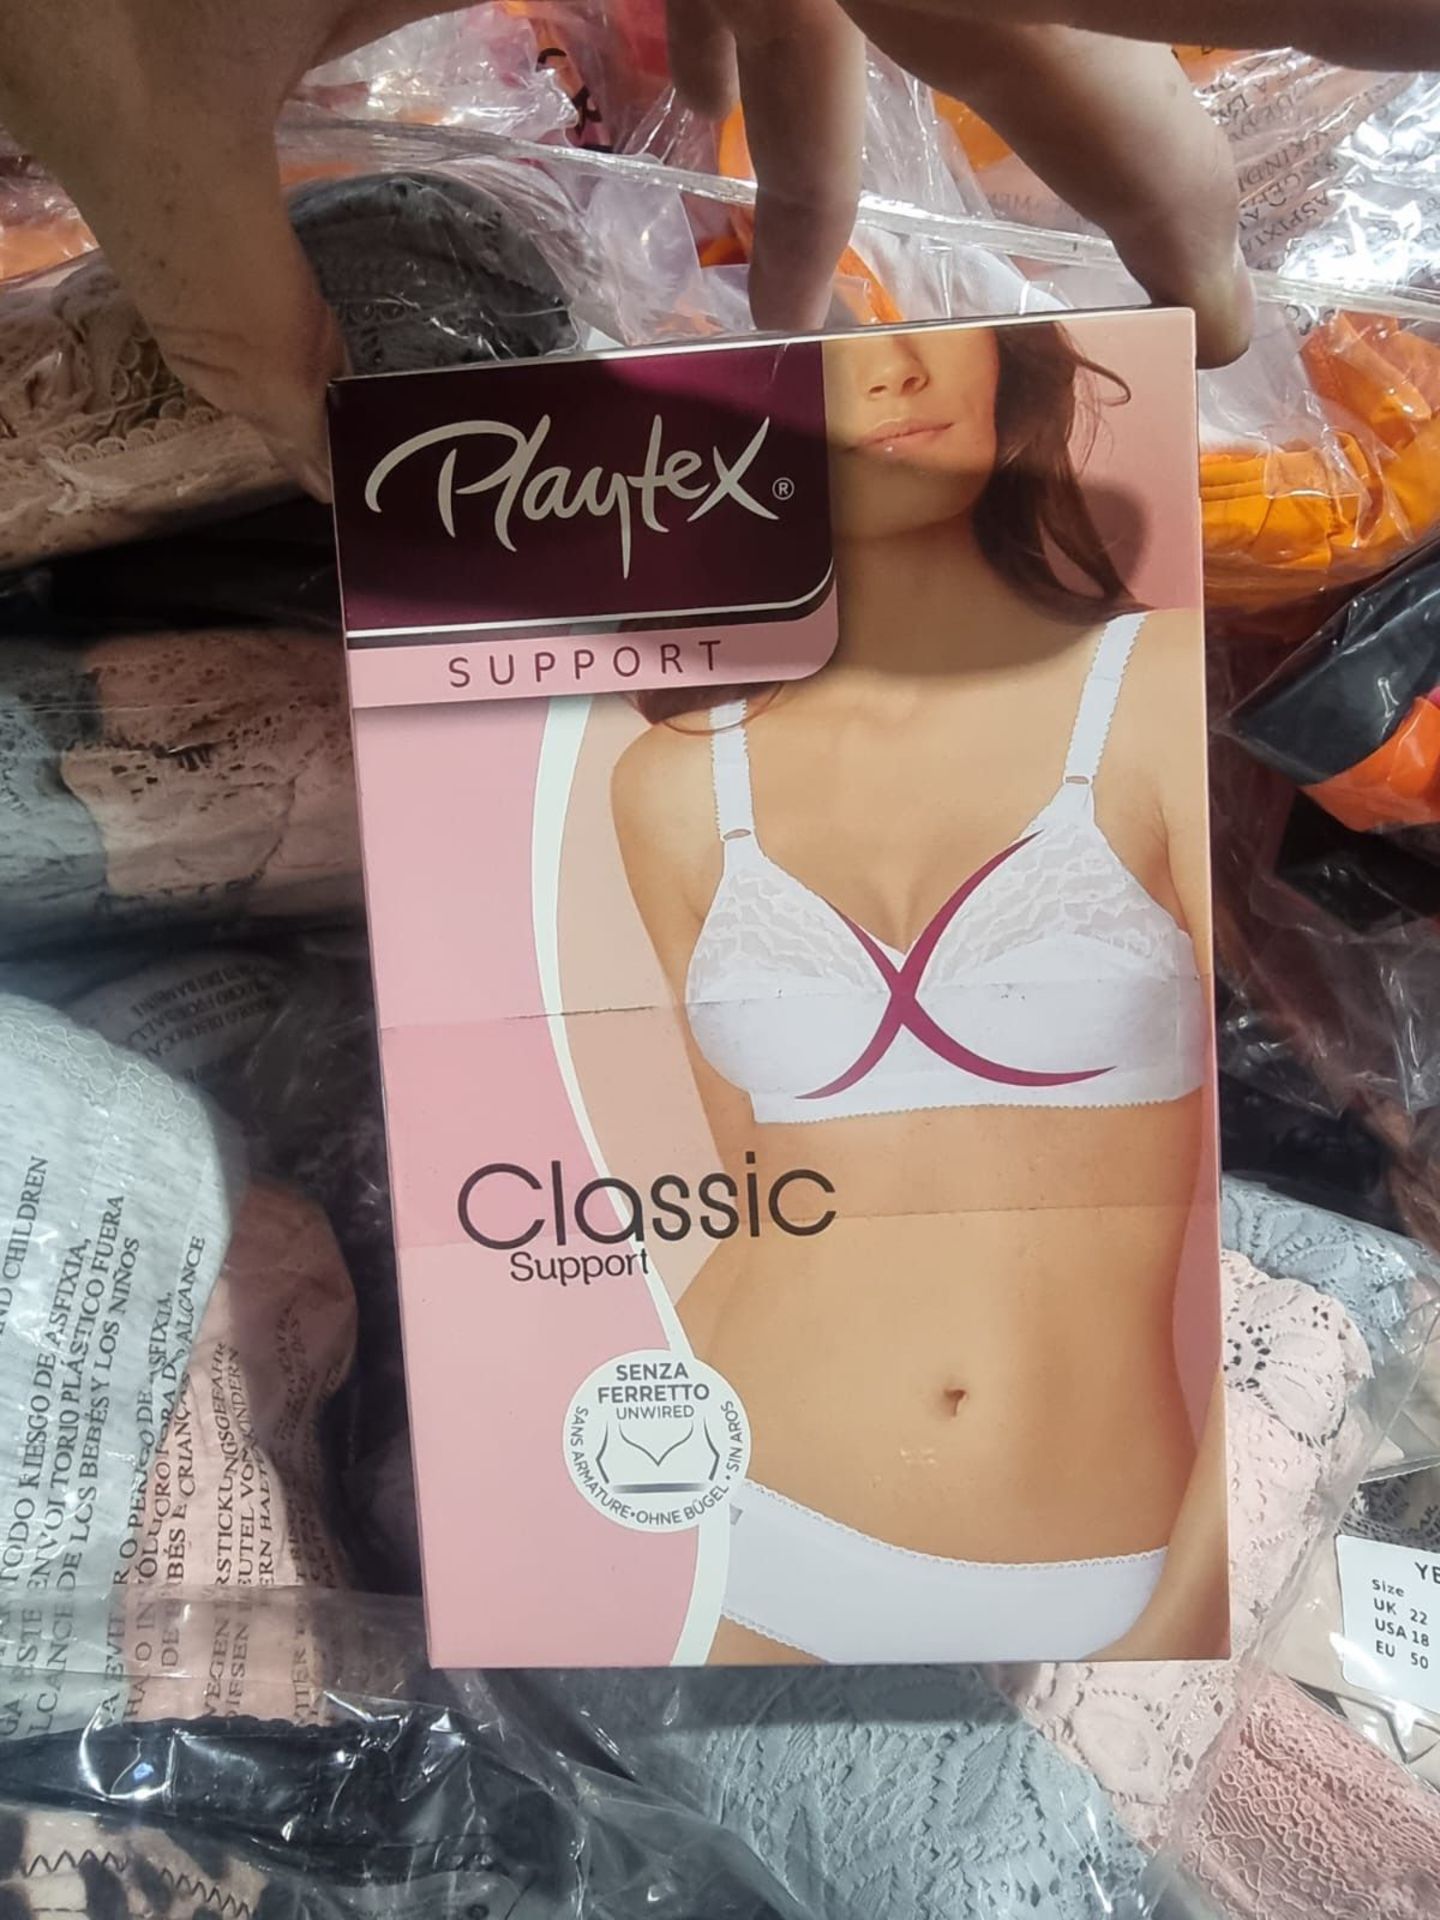 100 x NEW PACKAGED ASSORTED SWIM & UNDERWEAR FROM BRAND SUCH AS WONDERBRA, BOUX AVENUE, ANN SUMMERS, - Image 32 of 53